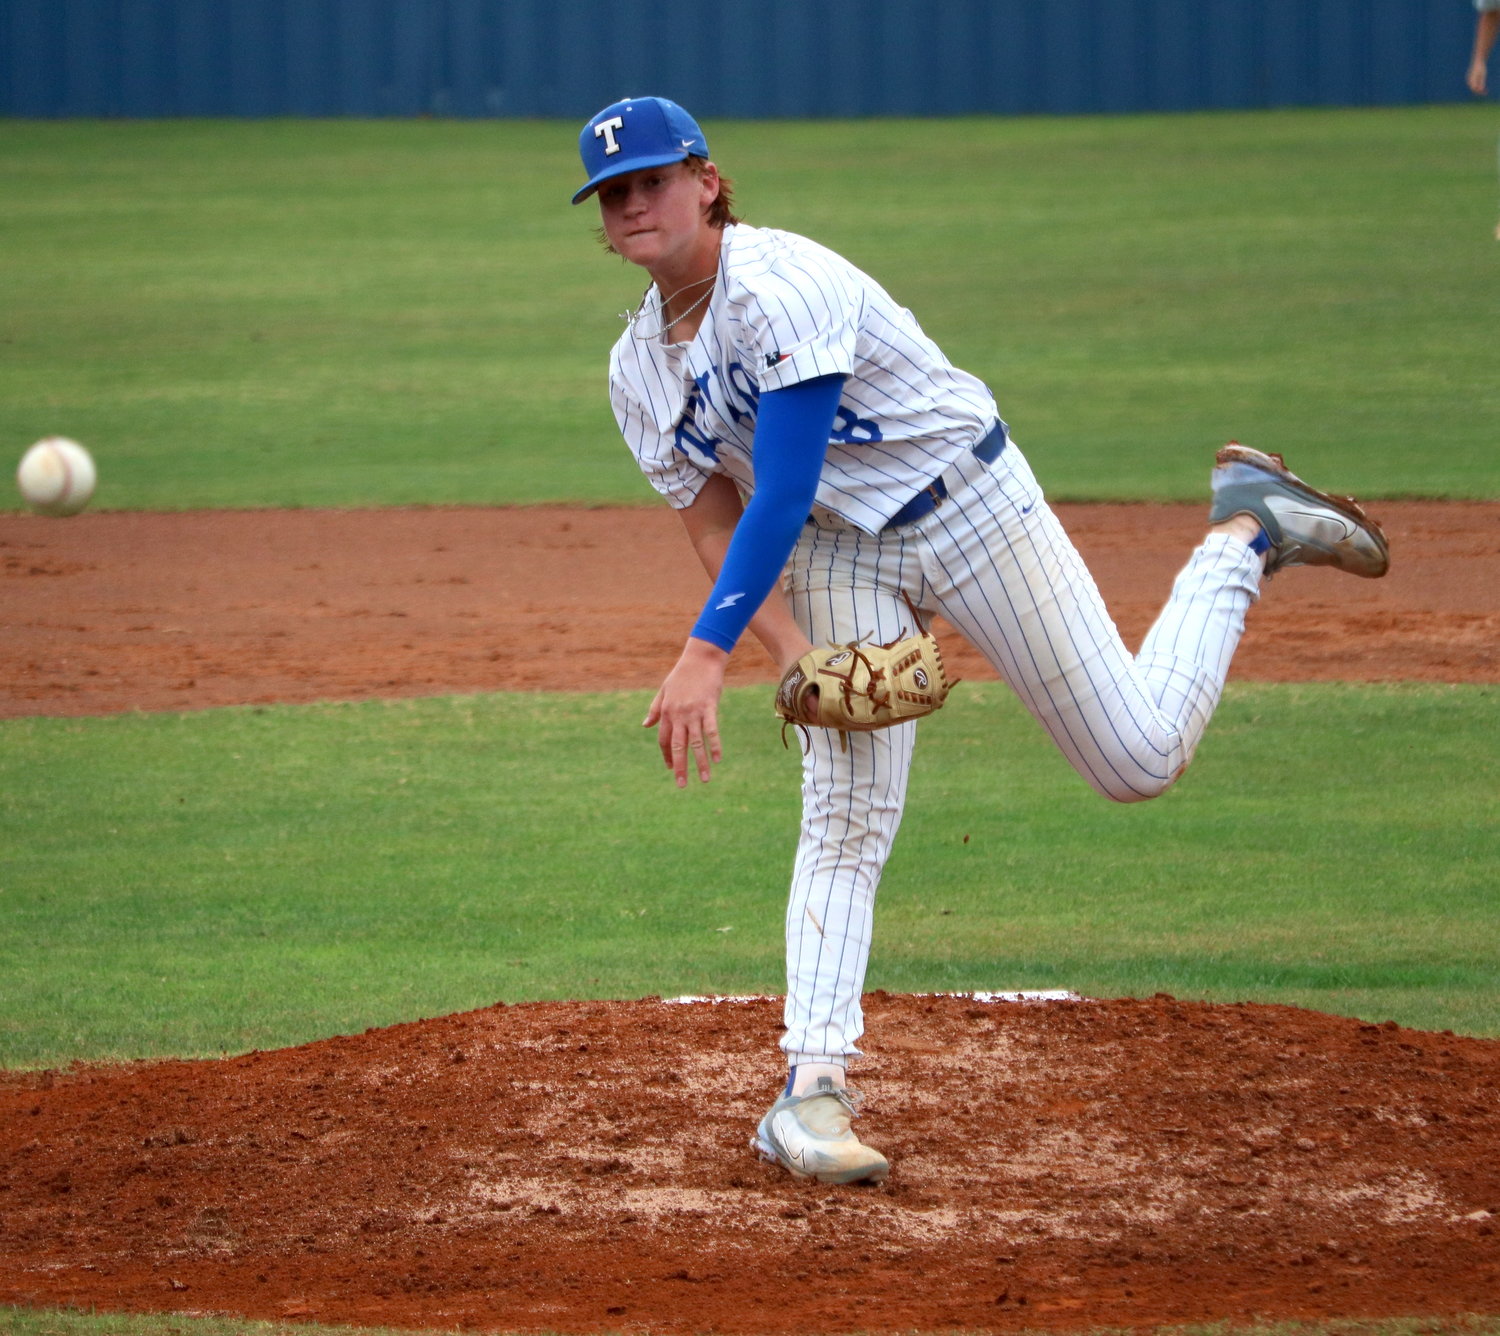 Bryce Krenek pitches during Thursday's game between Taylor and Seven Lakes at the Taylor baseball field.